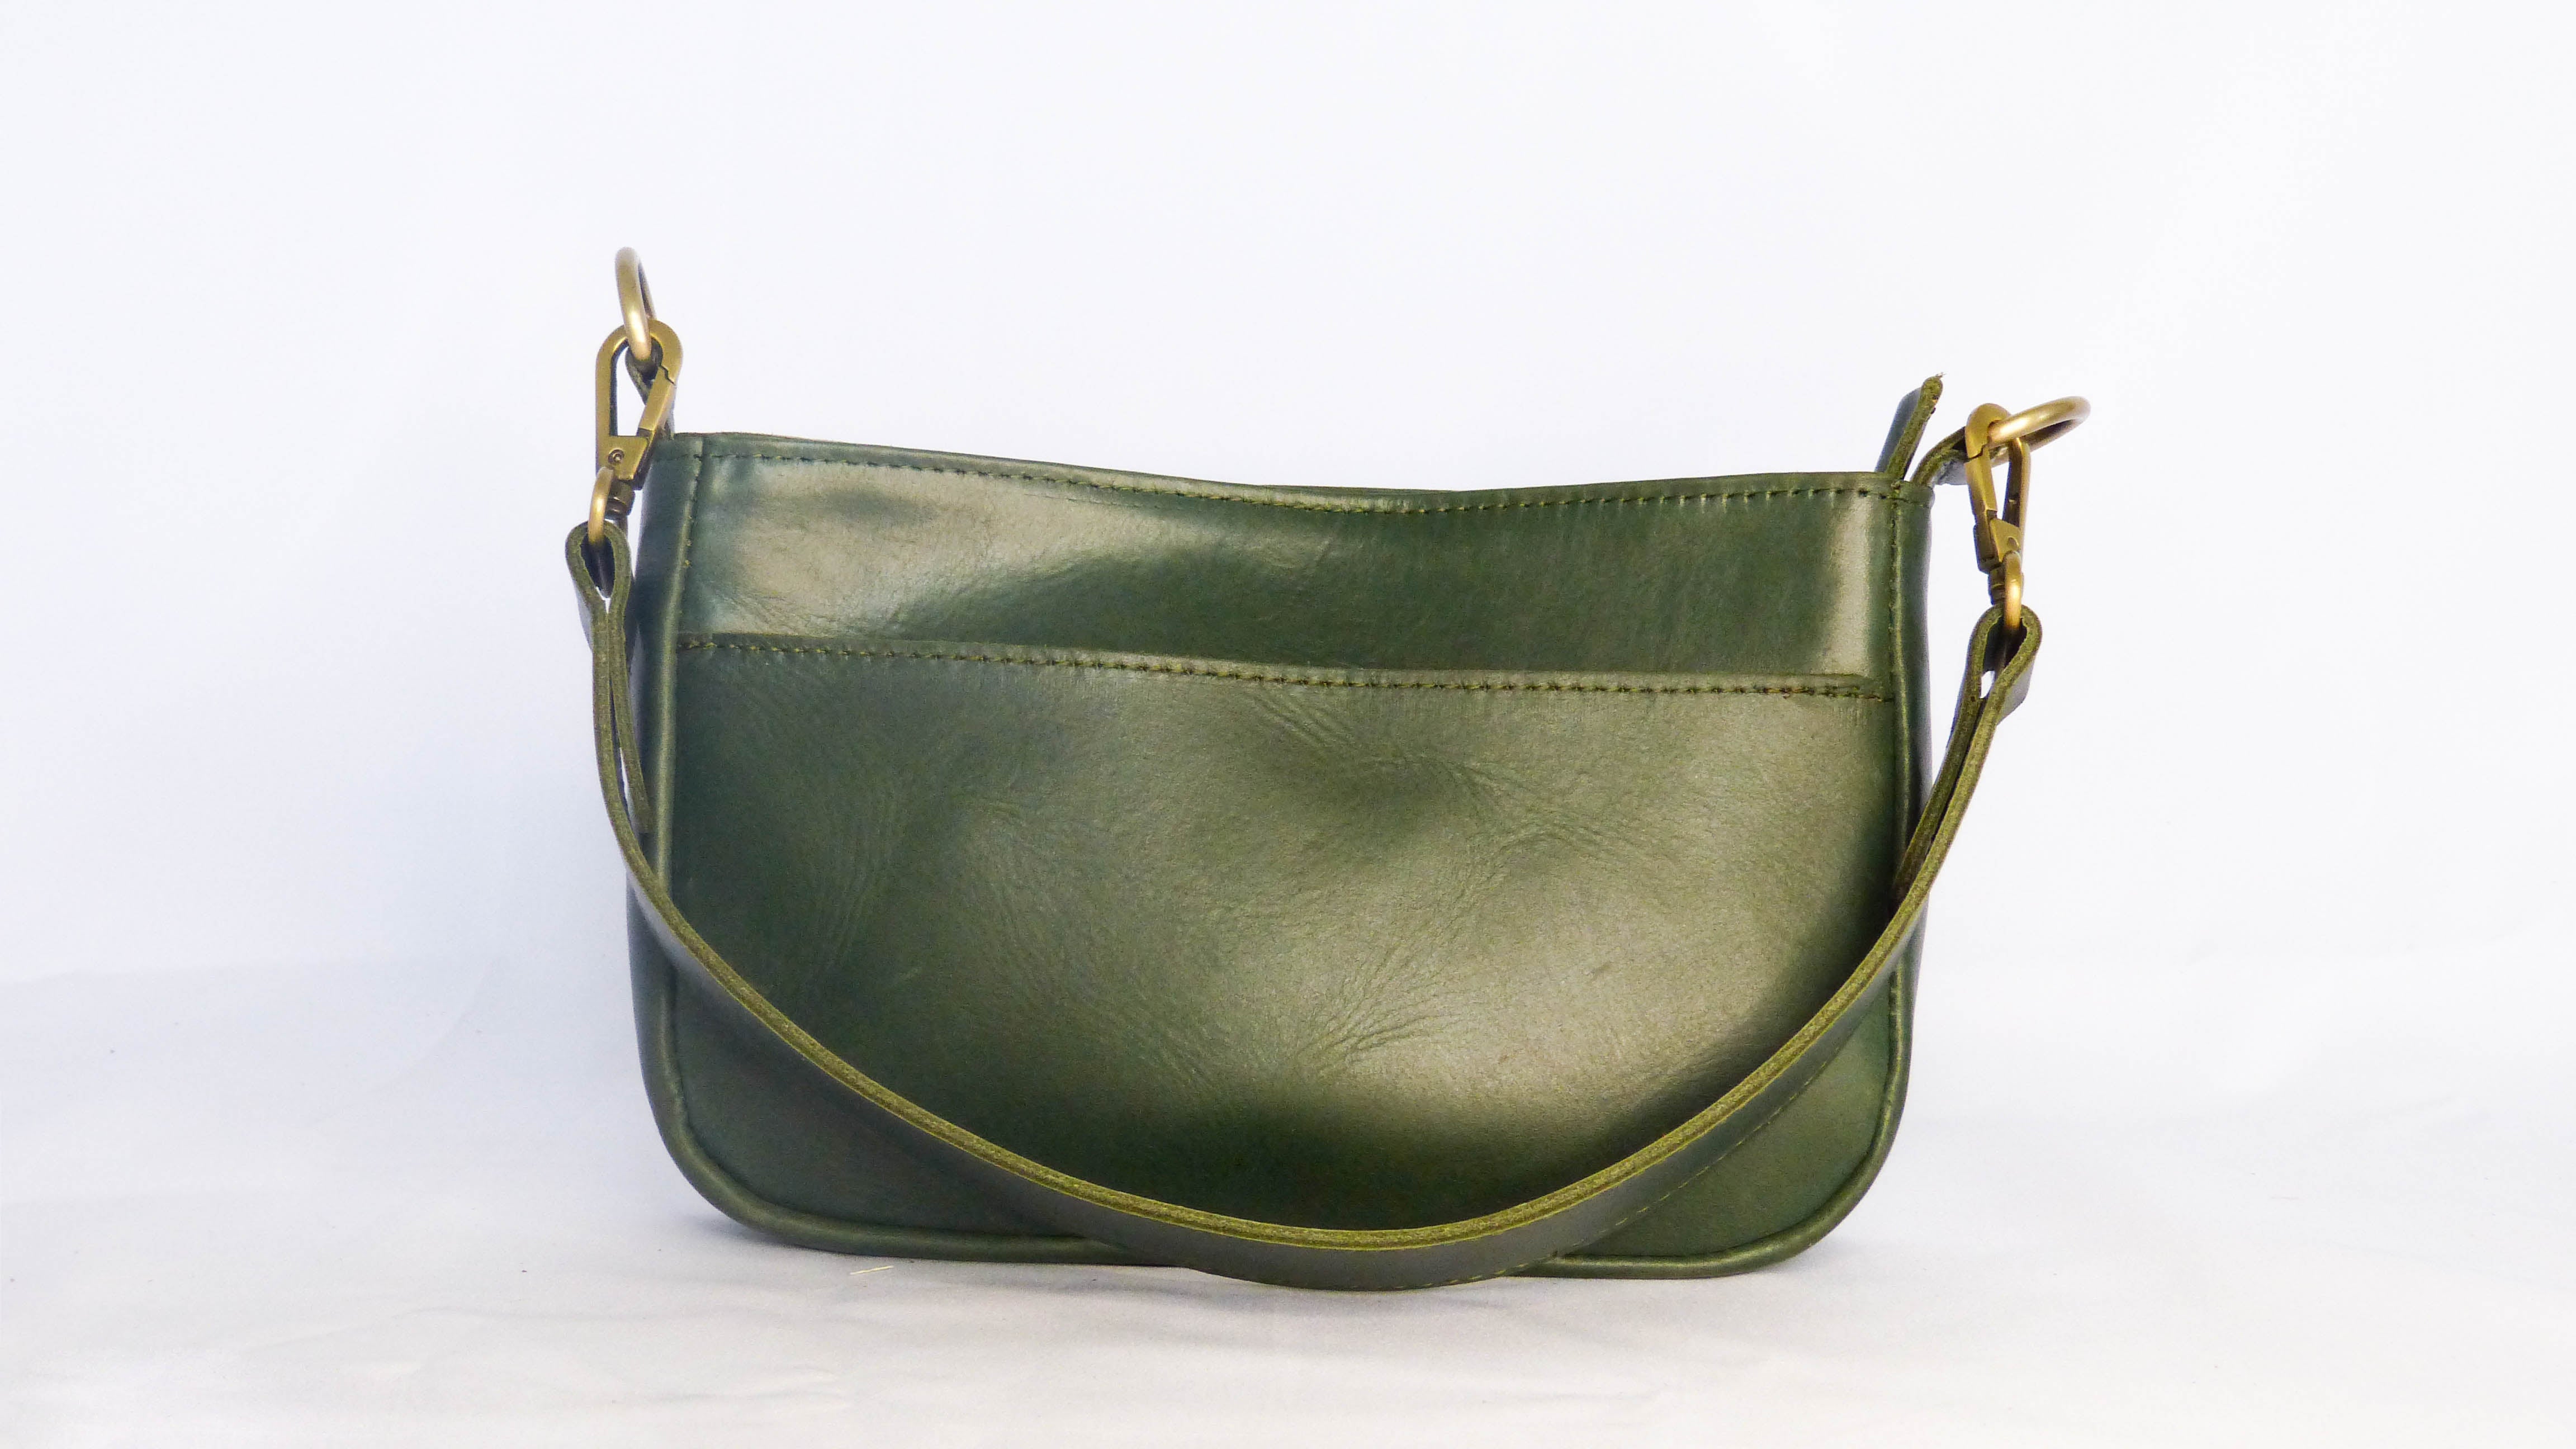 A green leather purse with a removable shoulder strap. Features a zippered top, inside zipper pocket, and outside phone pocket. Handmade by Ethiopian artisans. Measures 9 x 5.5 x 2.25.